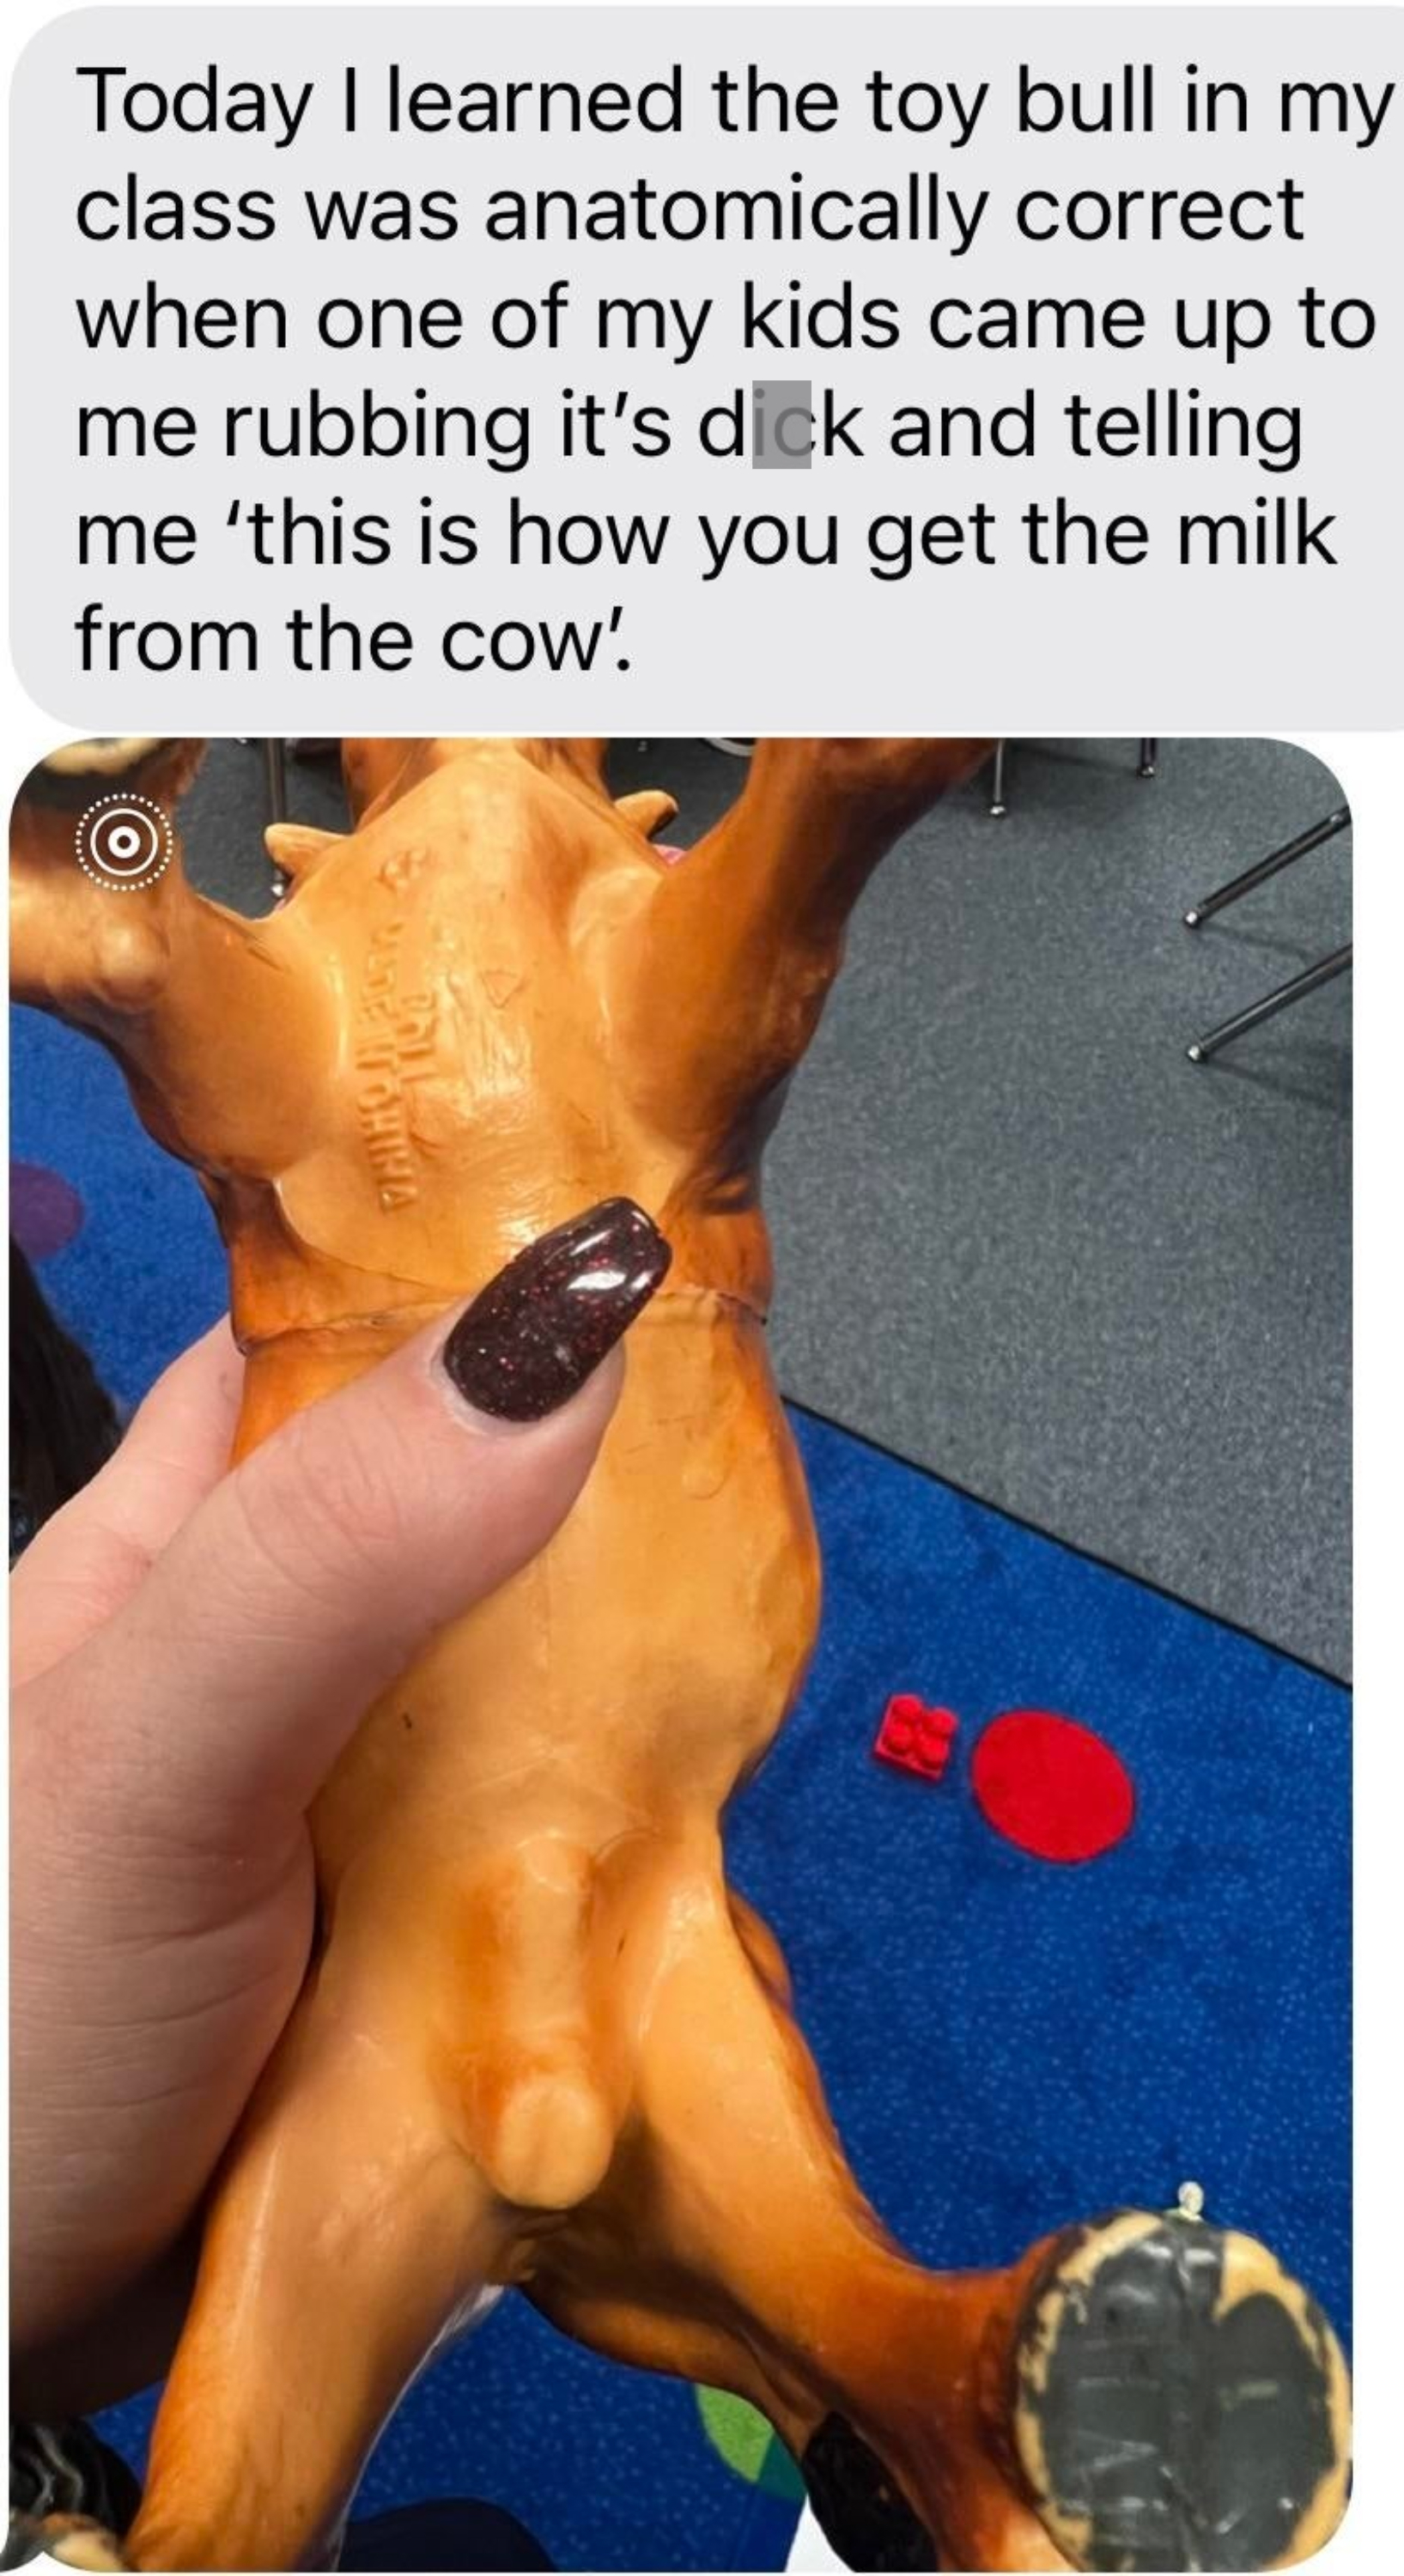 Student learned the toy bull was anatomically correct when another student rubbed its penis and said &quot;This is how you get the milk from a cow&quot;